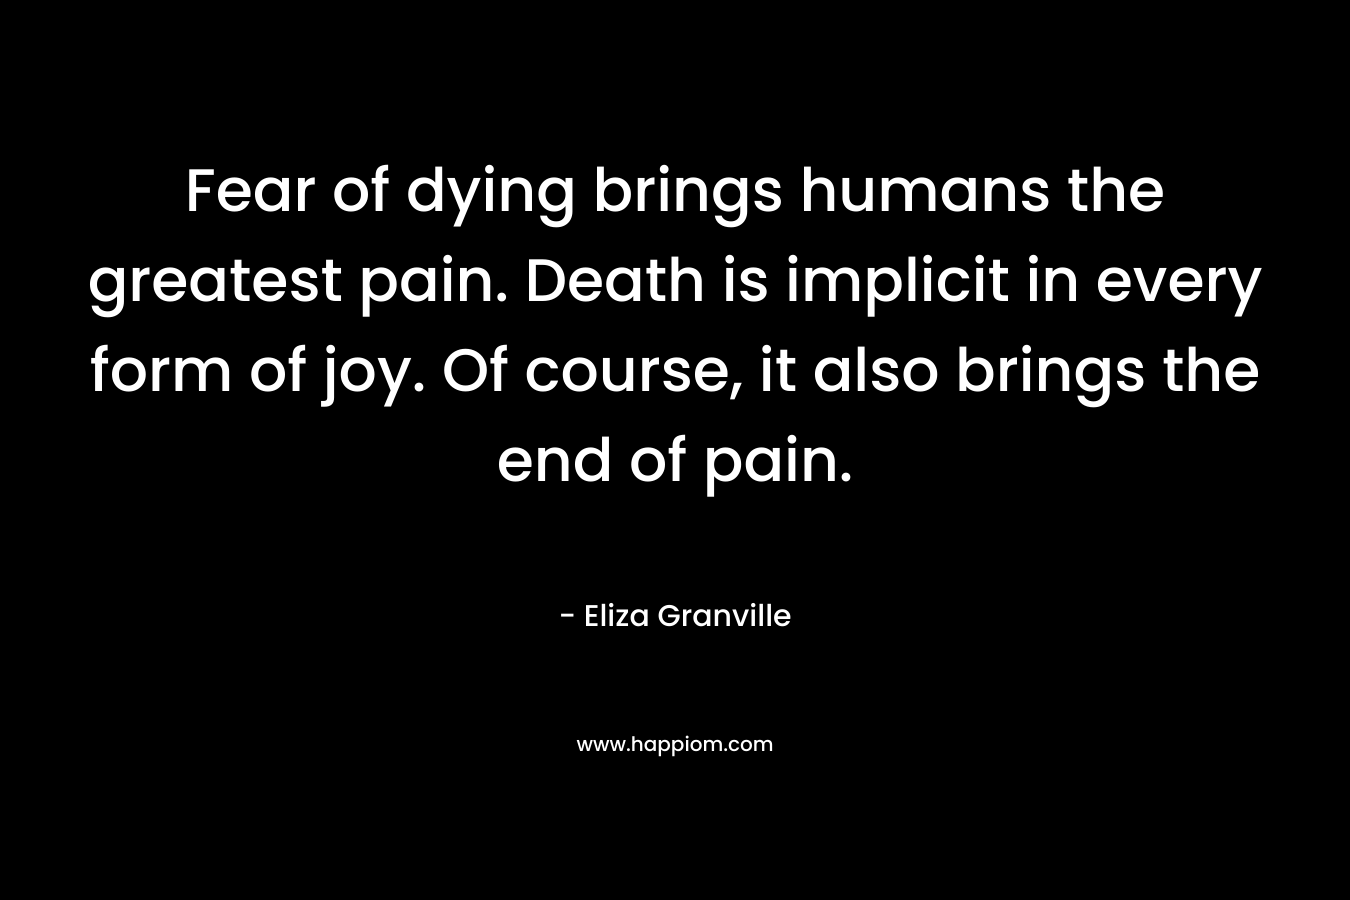 Fear of dying brings humans the greatest pain. Death is implicit in every form of joy. Of course, it also brings the end of pain.